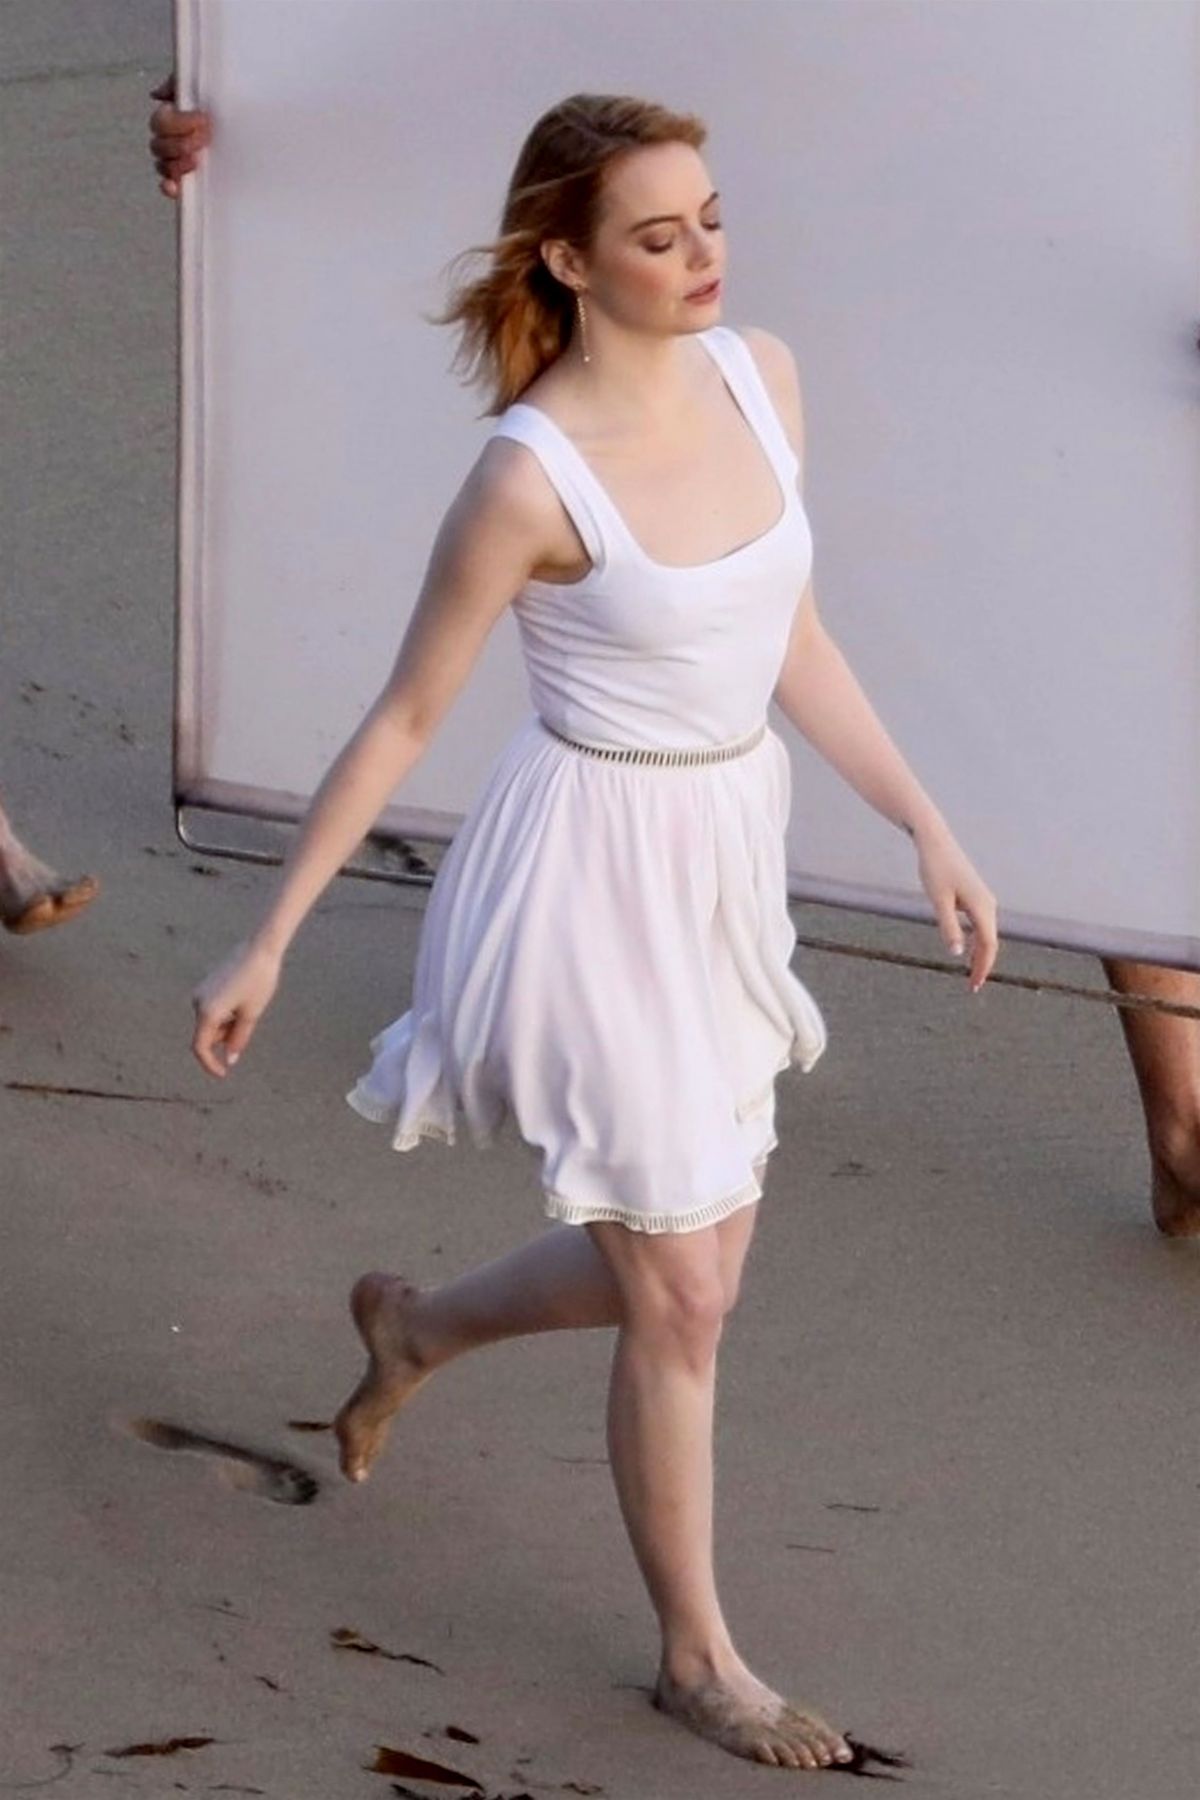 EMMA STONE on the Set of a Photoshoot at a Beach in Miami 04/25/2018. 